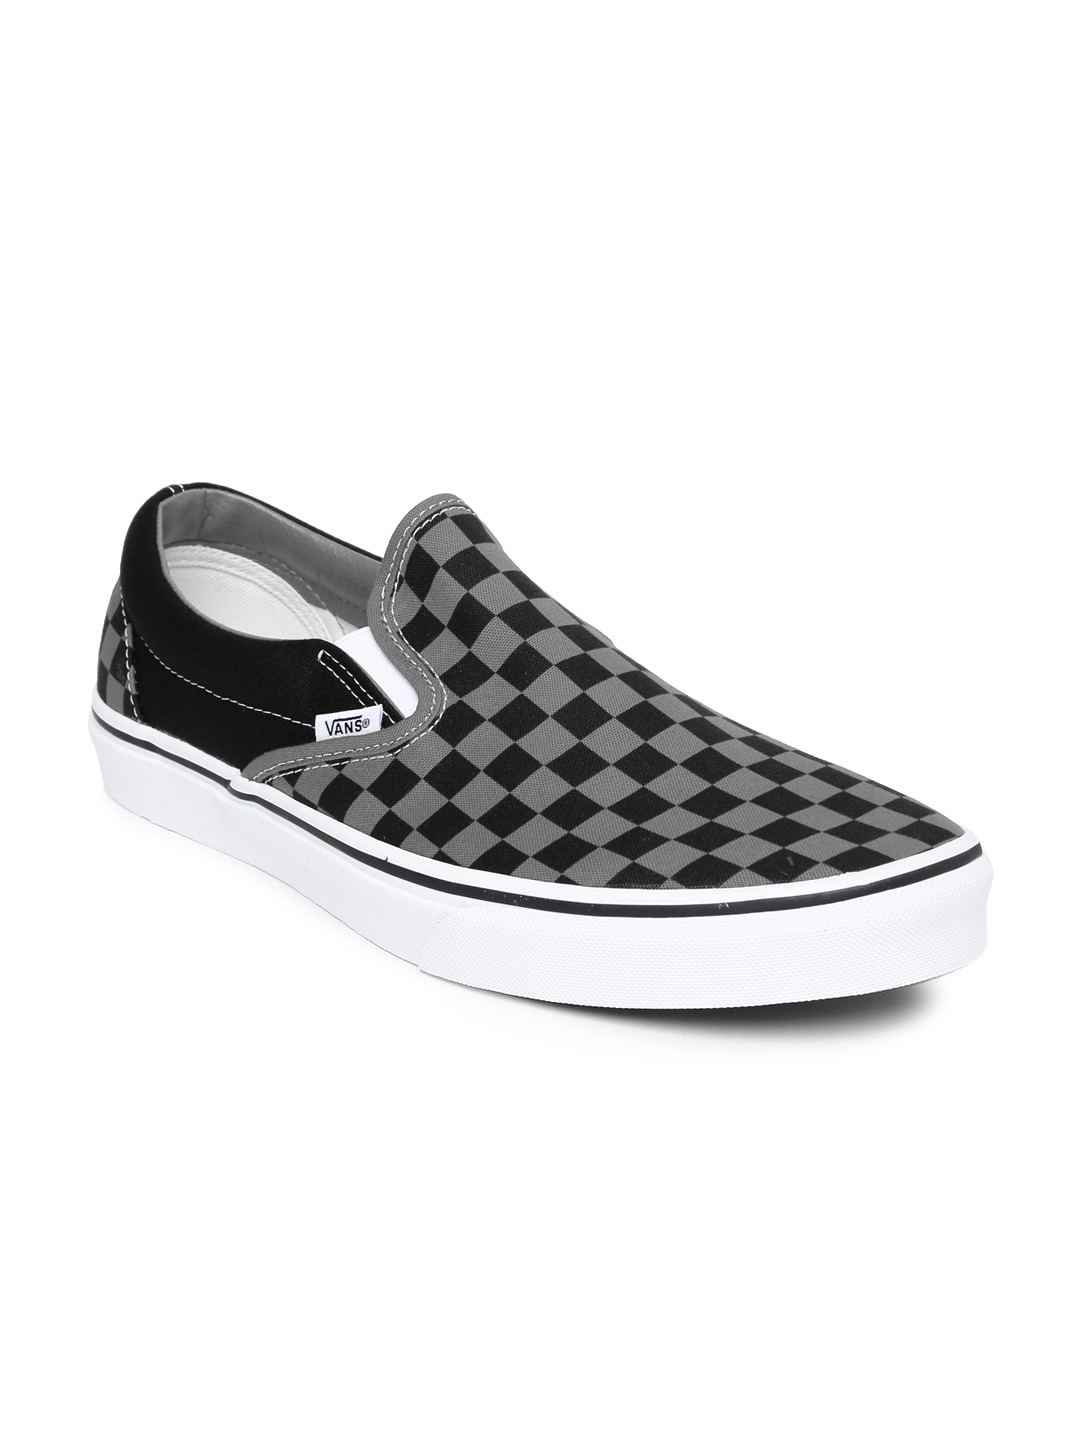 Buy Vans Unisex Black & Grey Classic Checked Slip On Sneakers - Casual Shoes  for Unisex 1593732 | Myntra